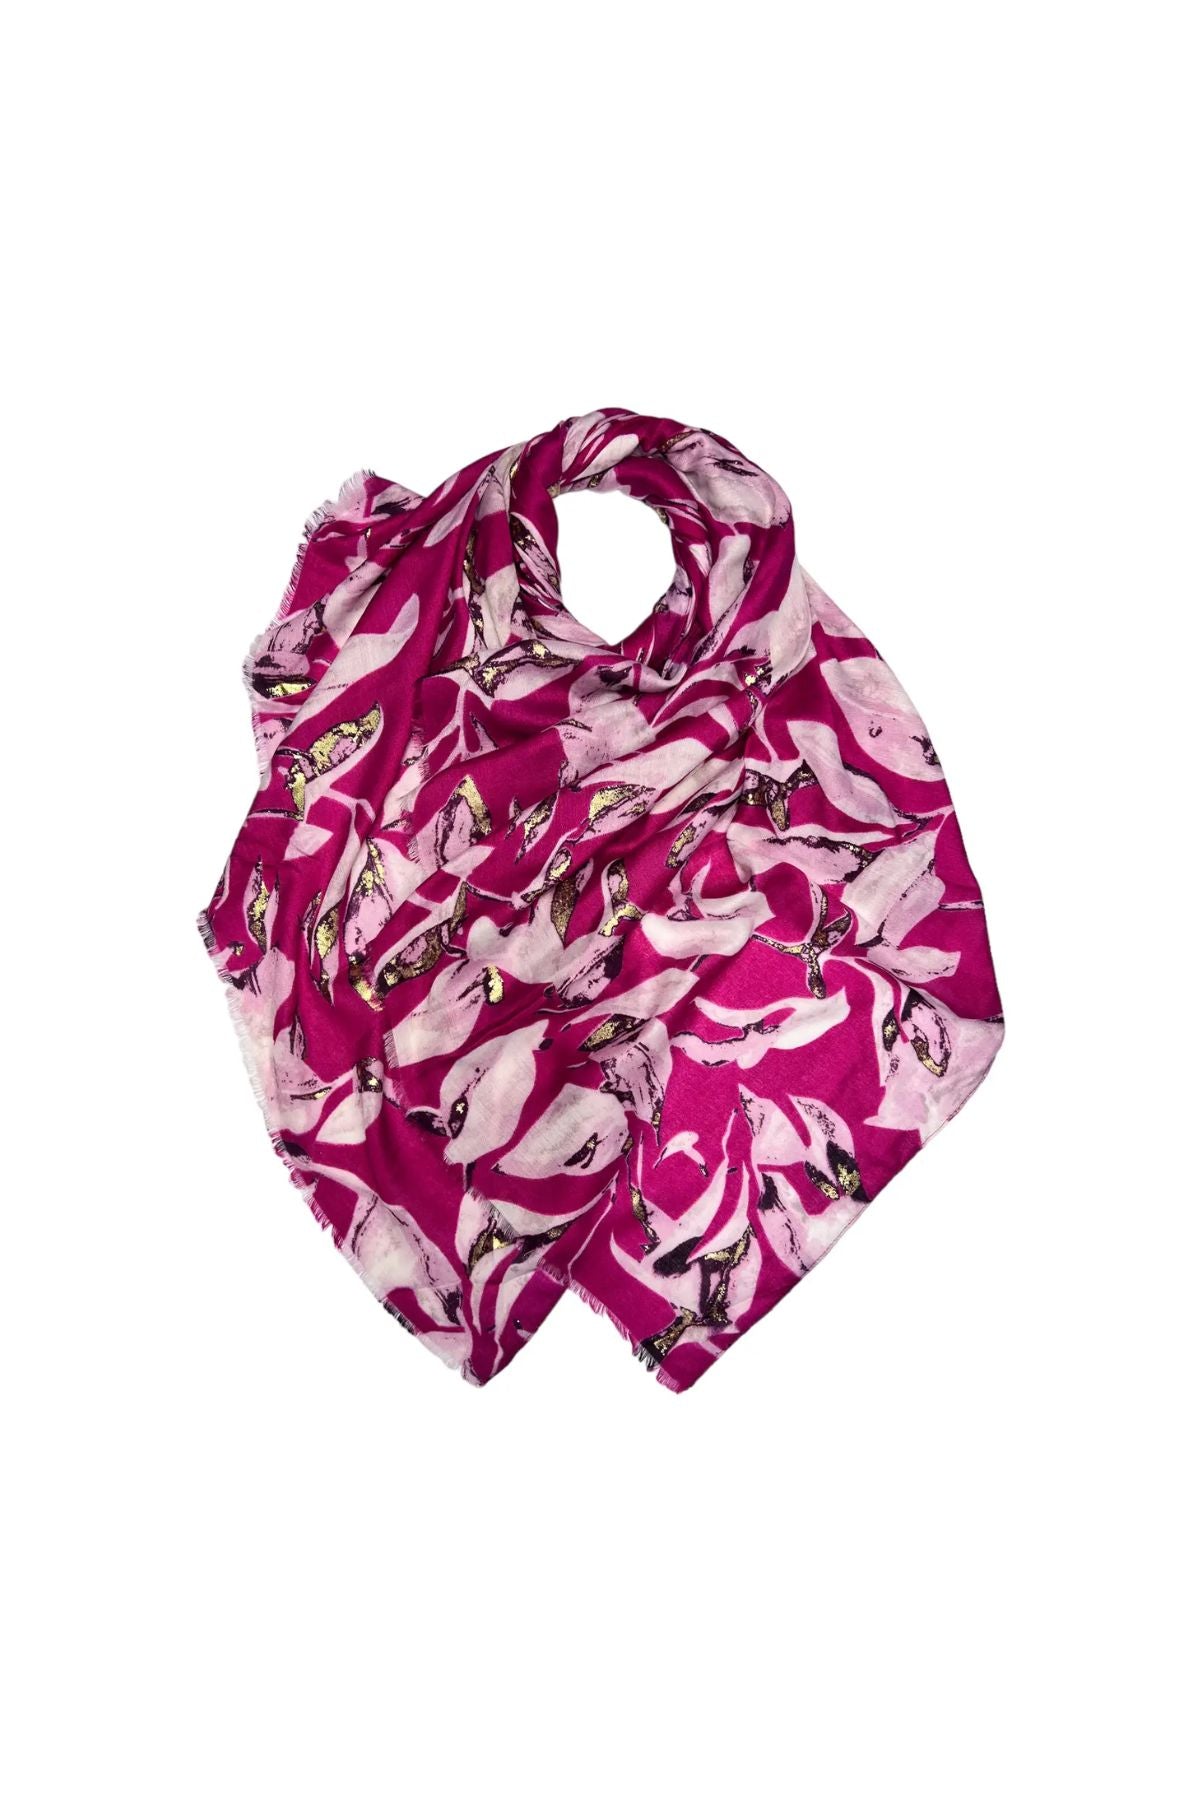 Hot pink winter leaves scarf